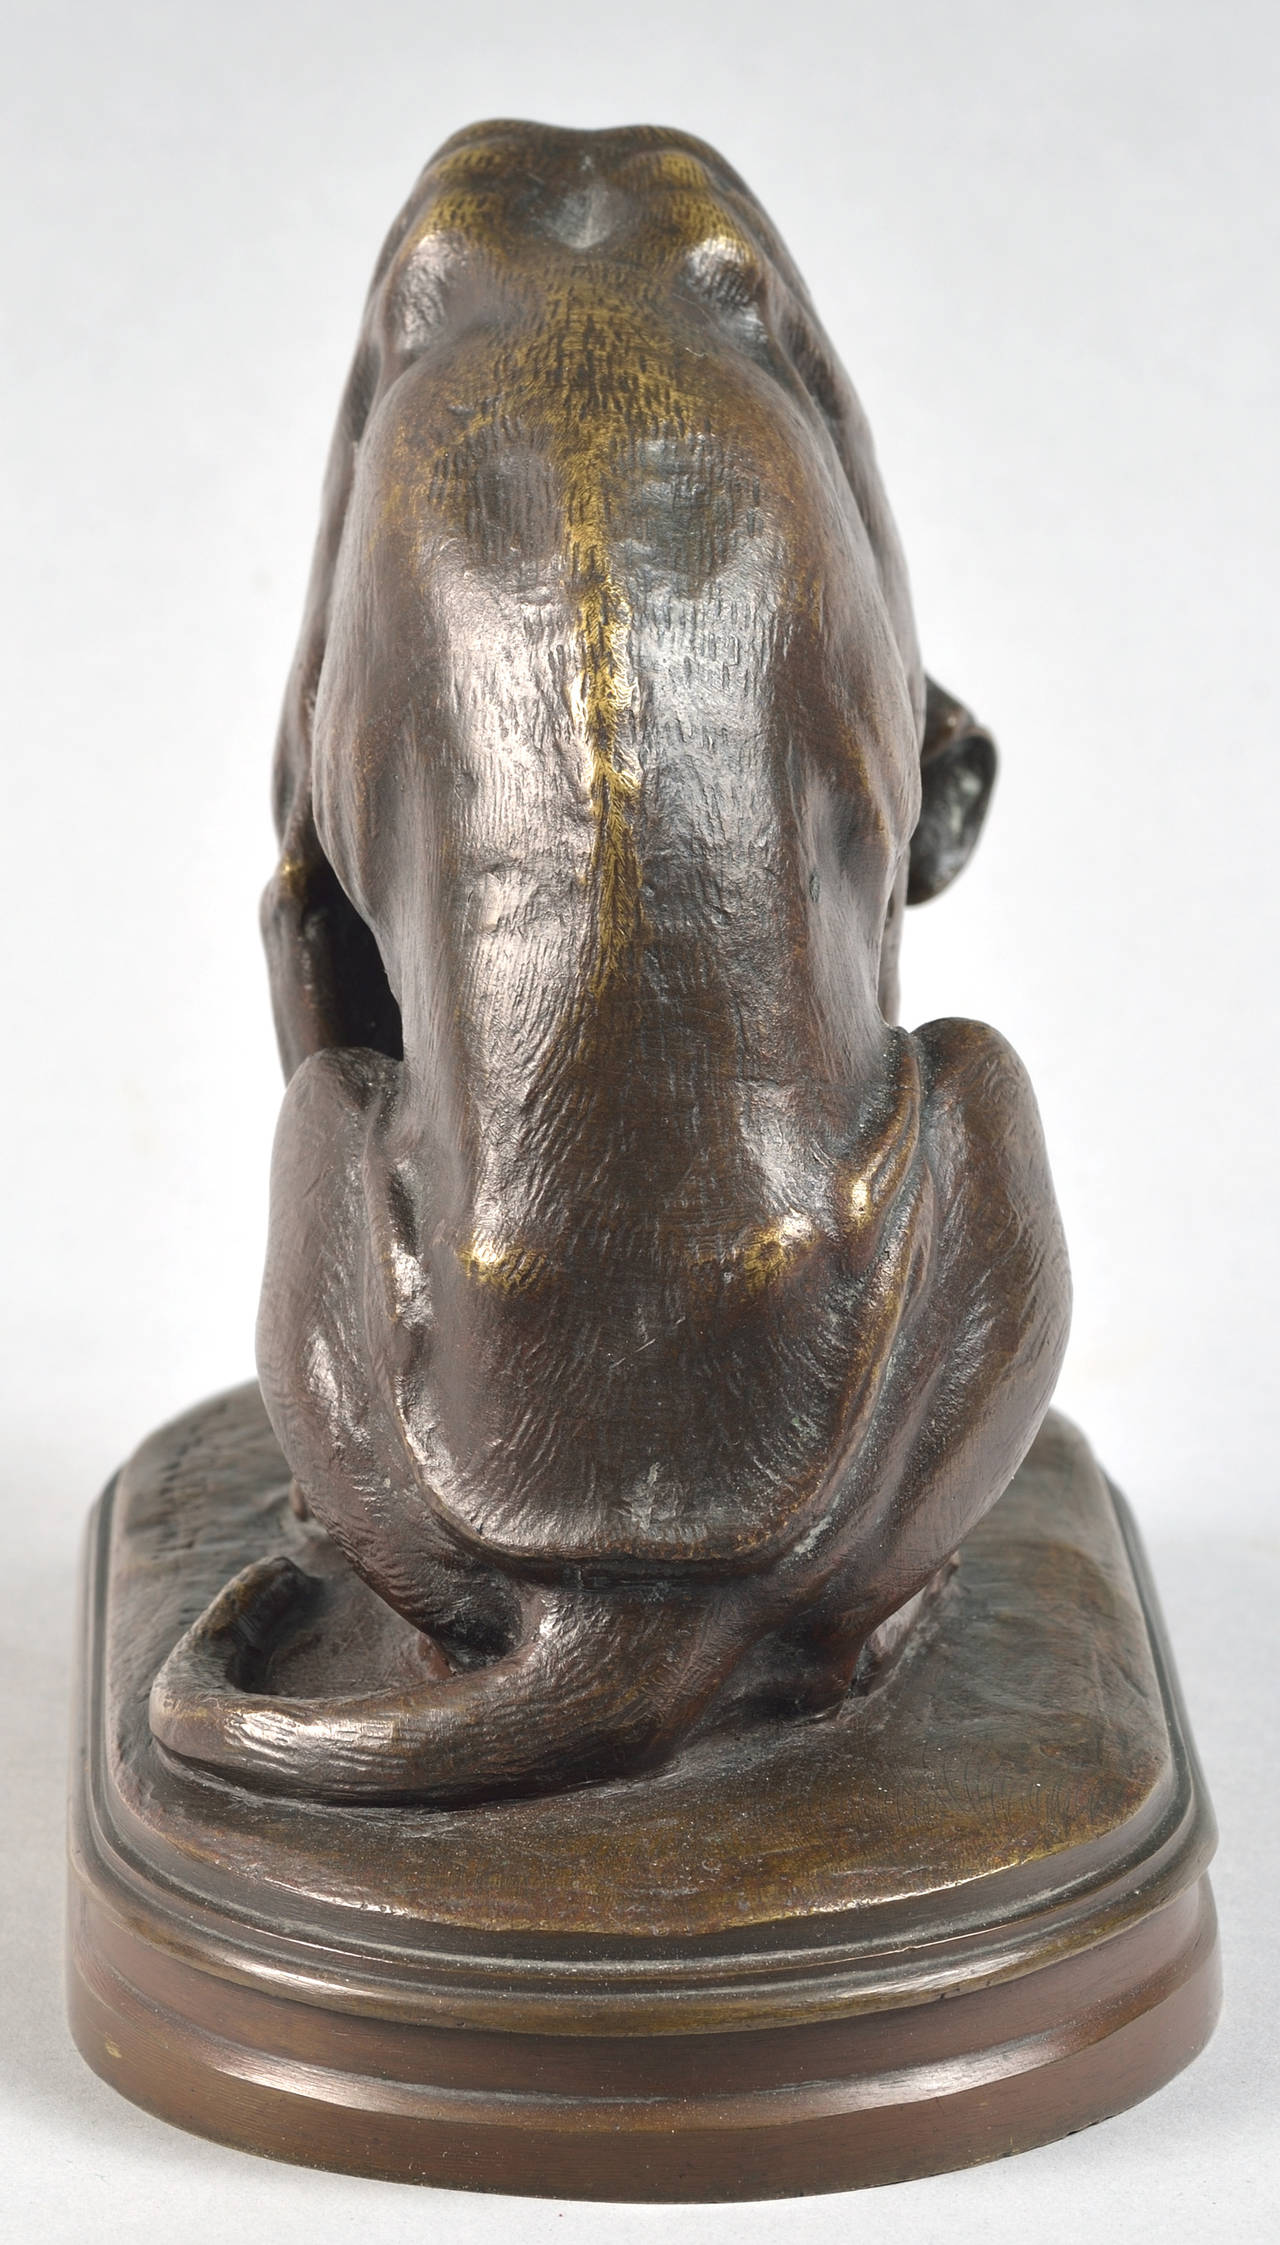 Henri-Alfred-Marie Jacquemart (French, 1824-1896).
Bronze sculpture of a dog studying a turtle.
circa 1875-1899.
Signed A. Jacquemart.
Height 15 cm.
18 x 10 cm.